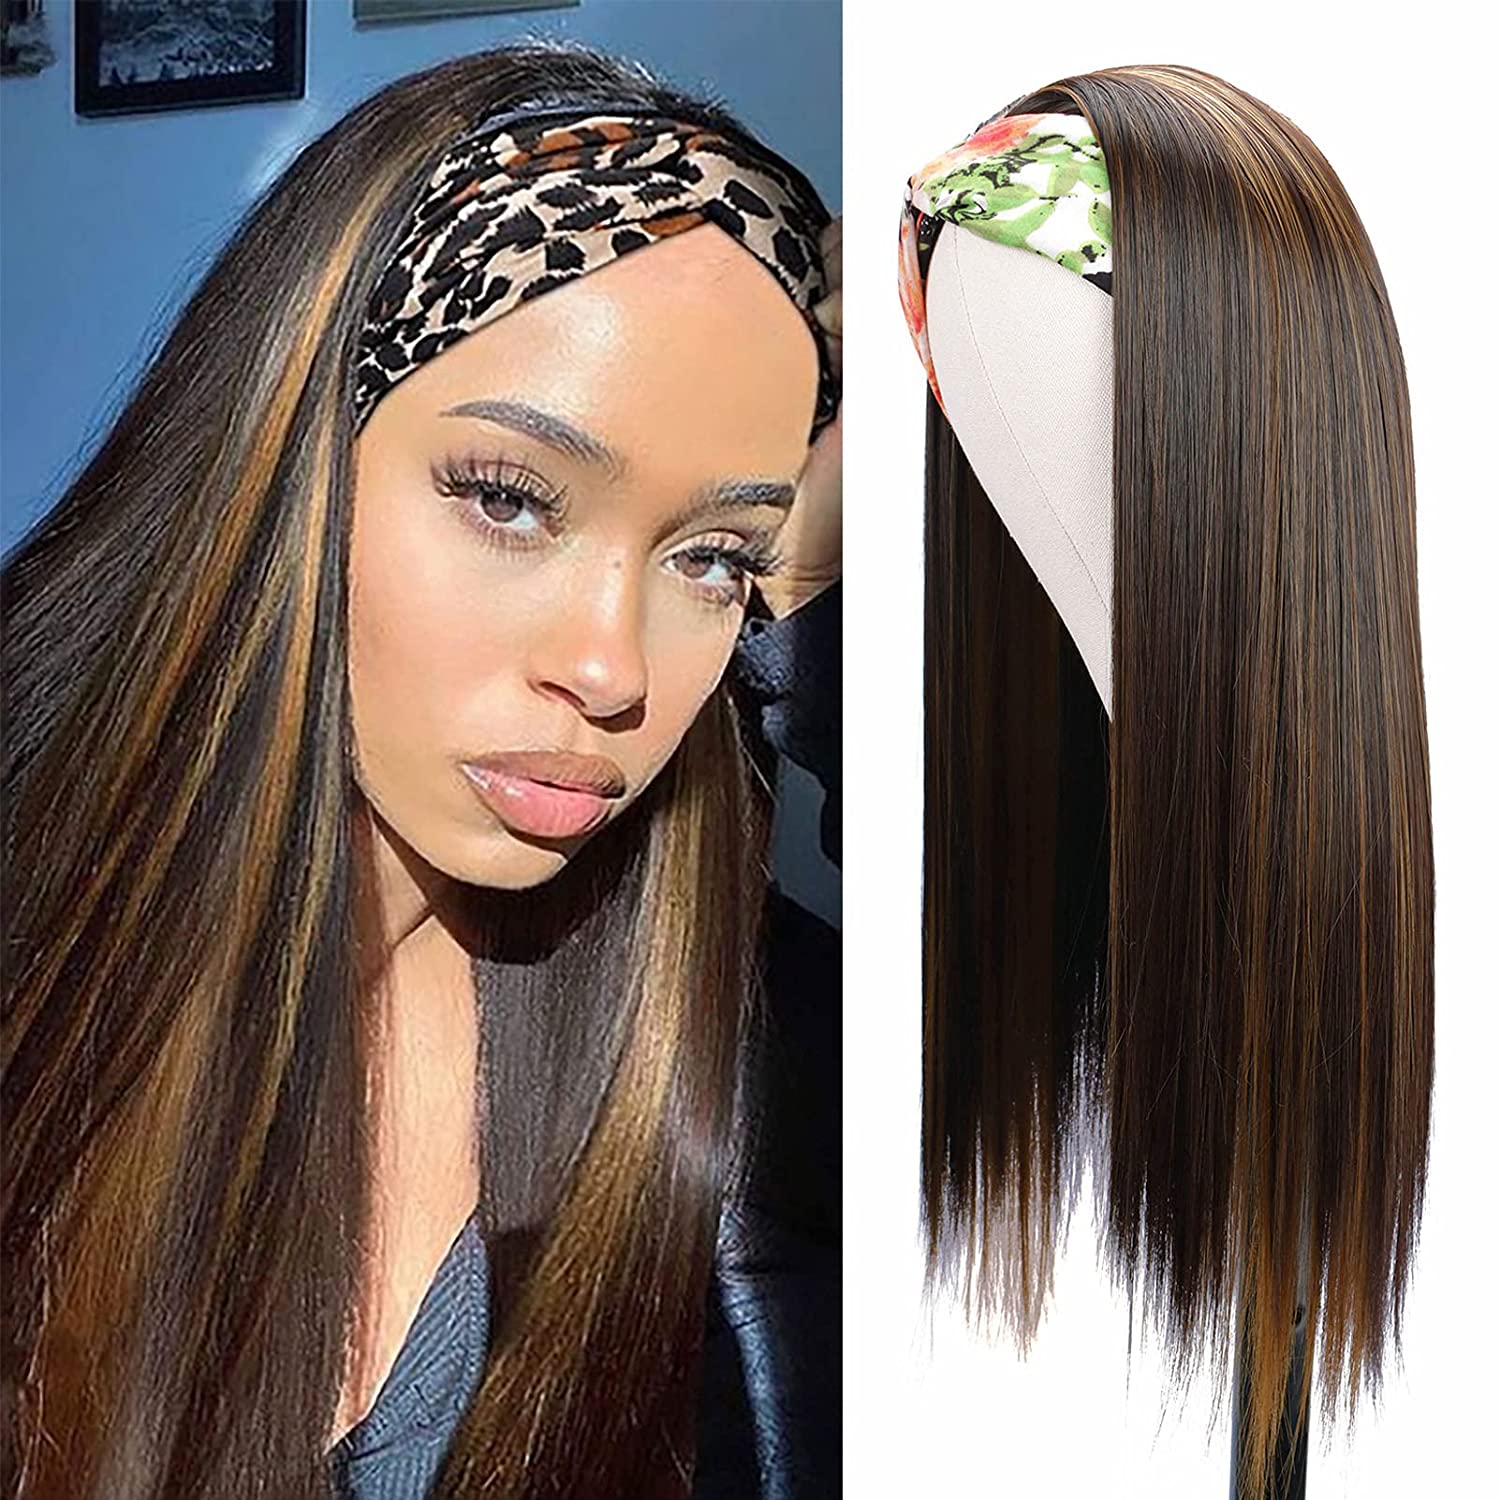 Long Straight Headband Wigs for Black Women 24 Inch Synthetic Headband Wig Highlights Straight Half Wigs Glueless Wigs with Headband Attached High Density(24_,HL6_3027)-0